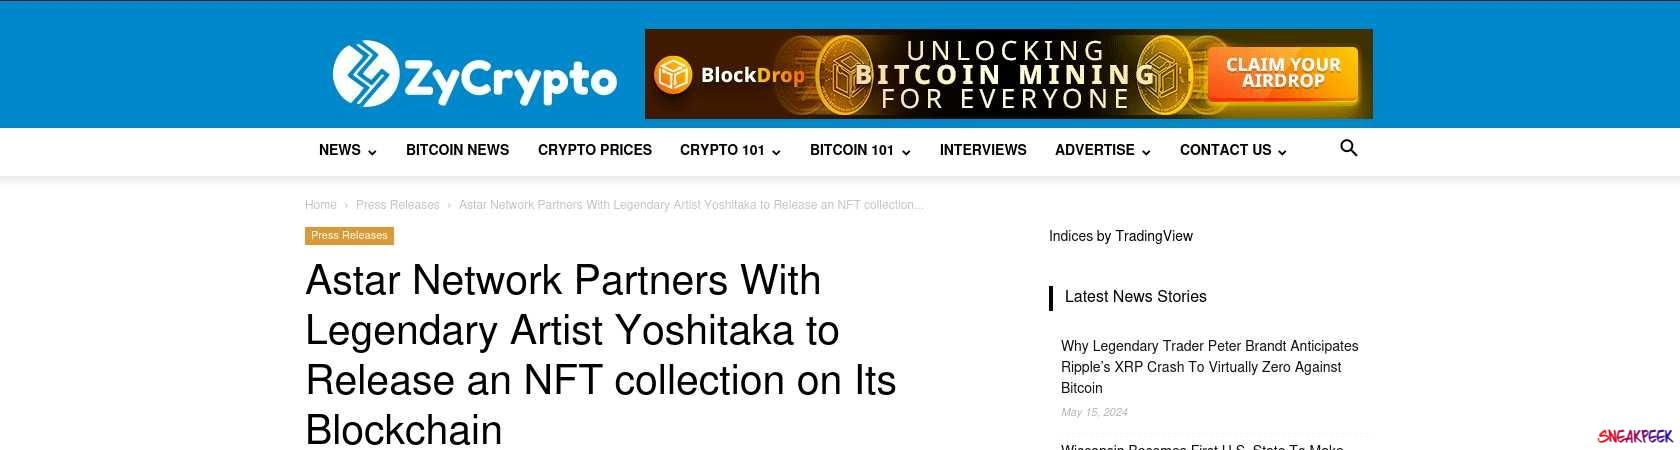 Read the full Article:  ⭲ Astar Network Partners With Legendary Artist Yoshitaka to Release an NFT collection on Its Blockchain